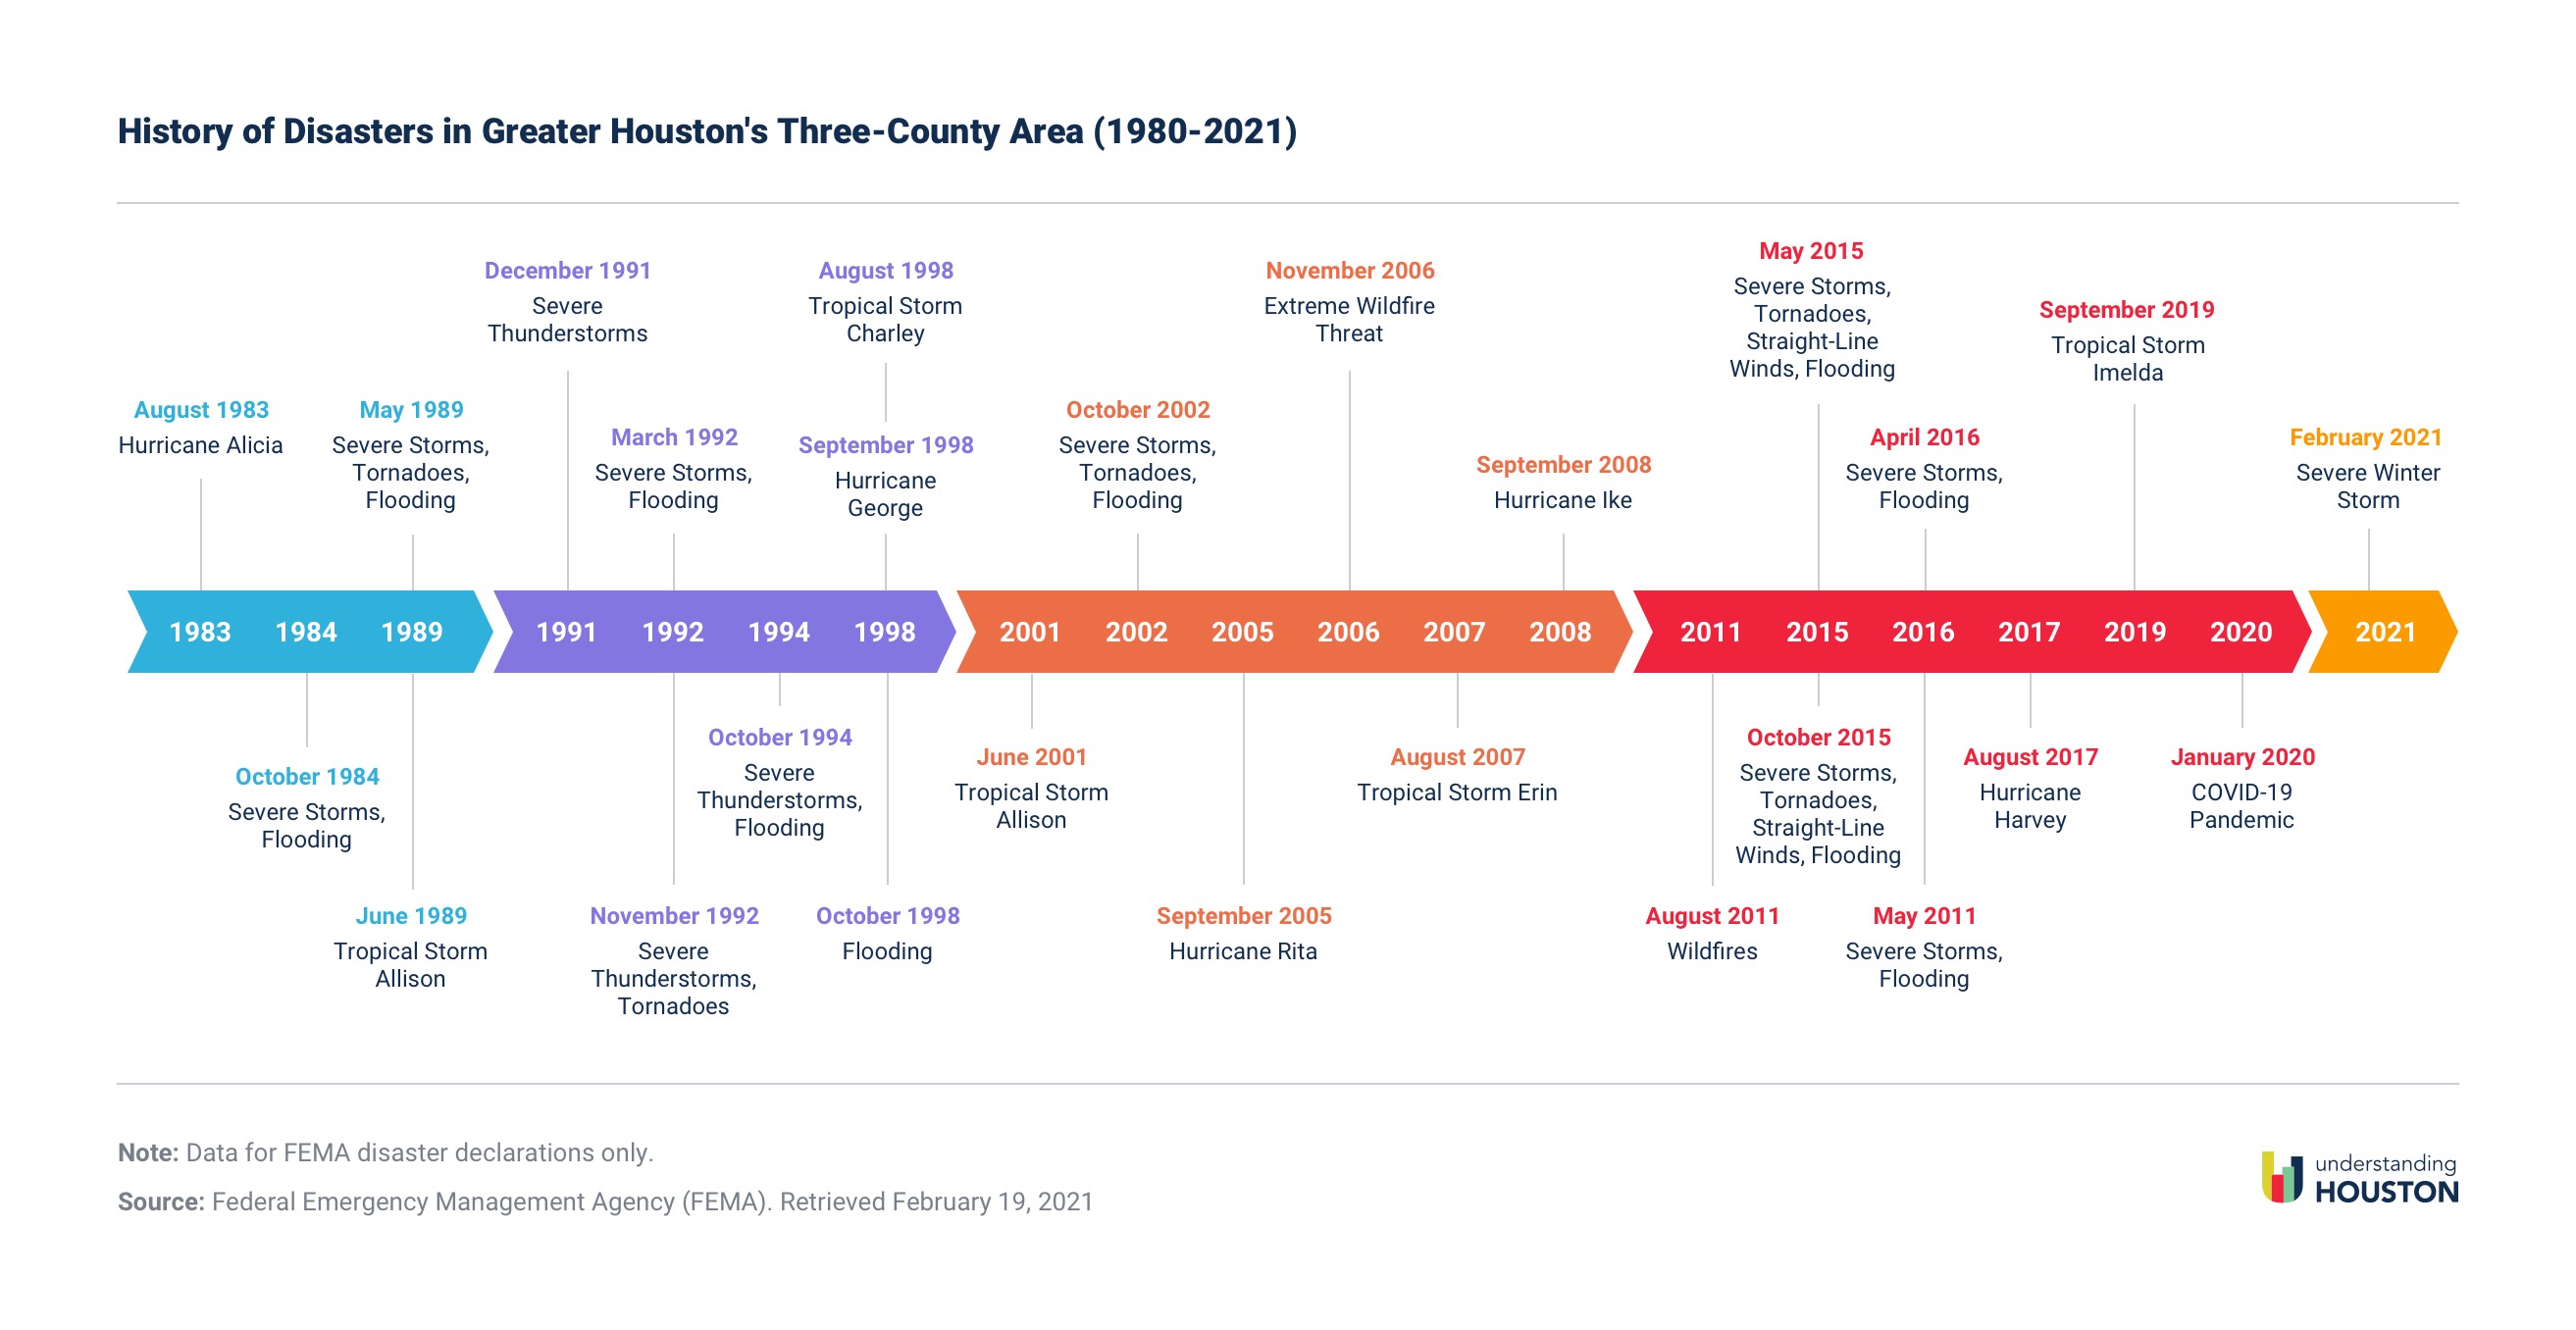 History of Disasters in Greater Houston's Three-County Area (1980-2021)